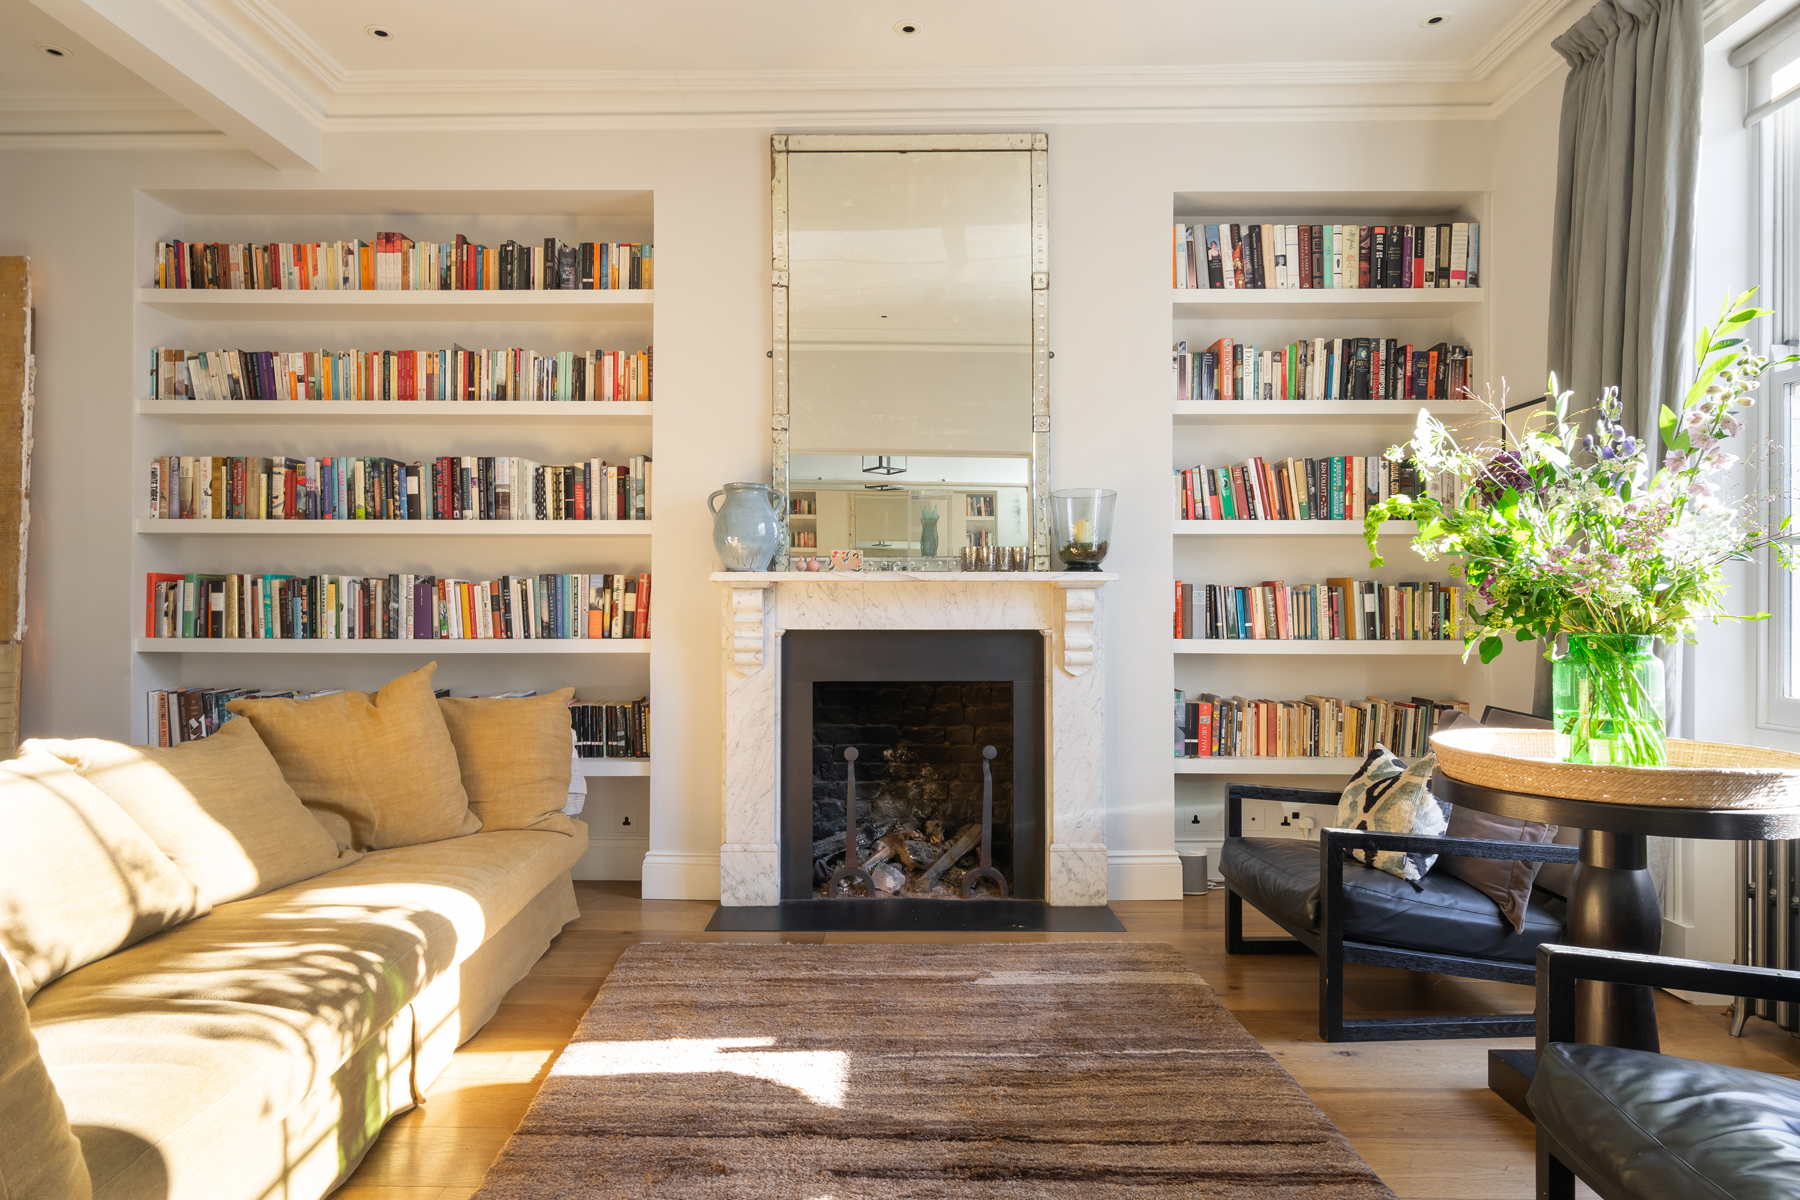 For Sale: Portland Road W11 Living Room with bookcases and fireplace